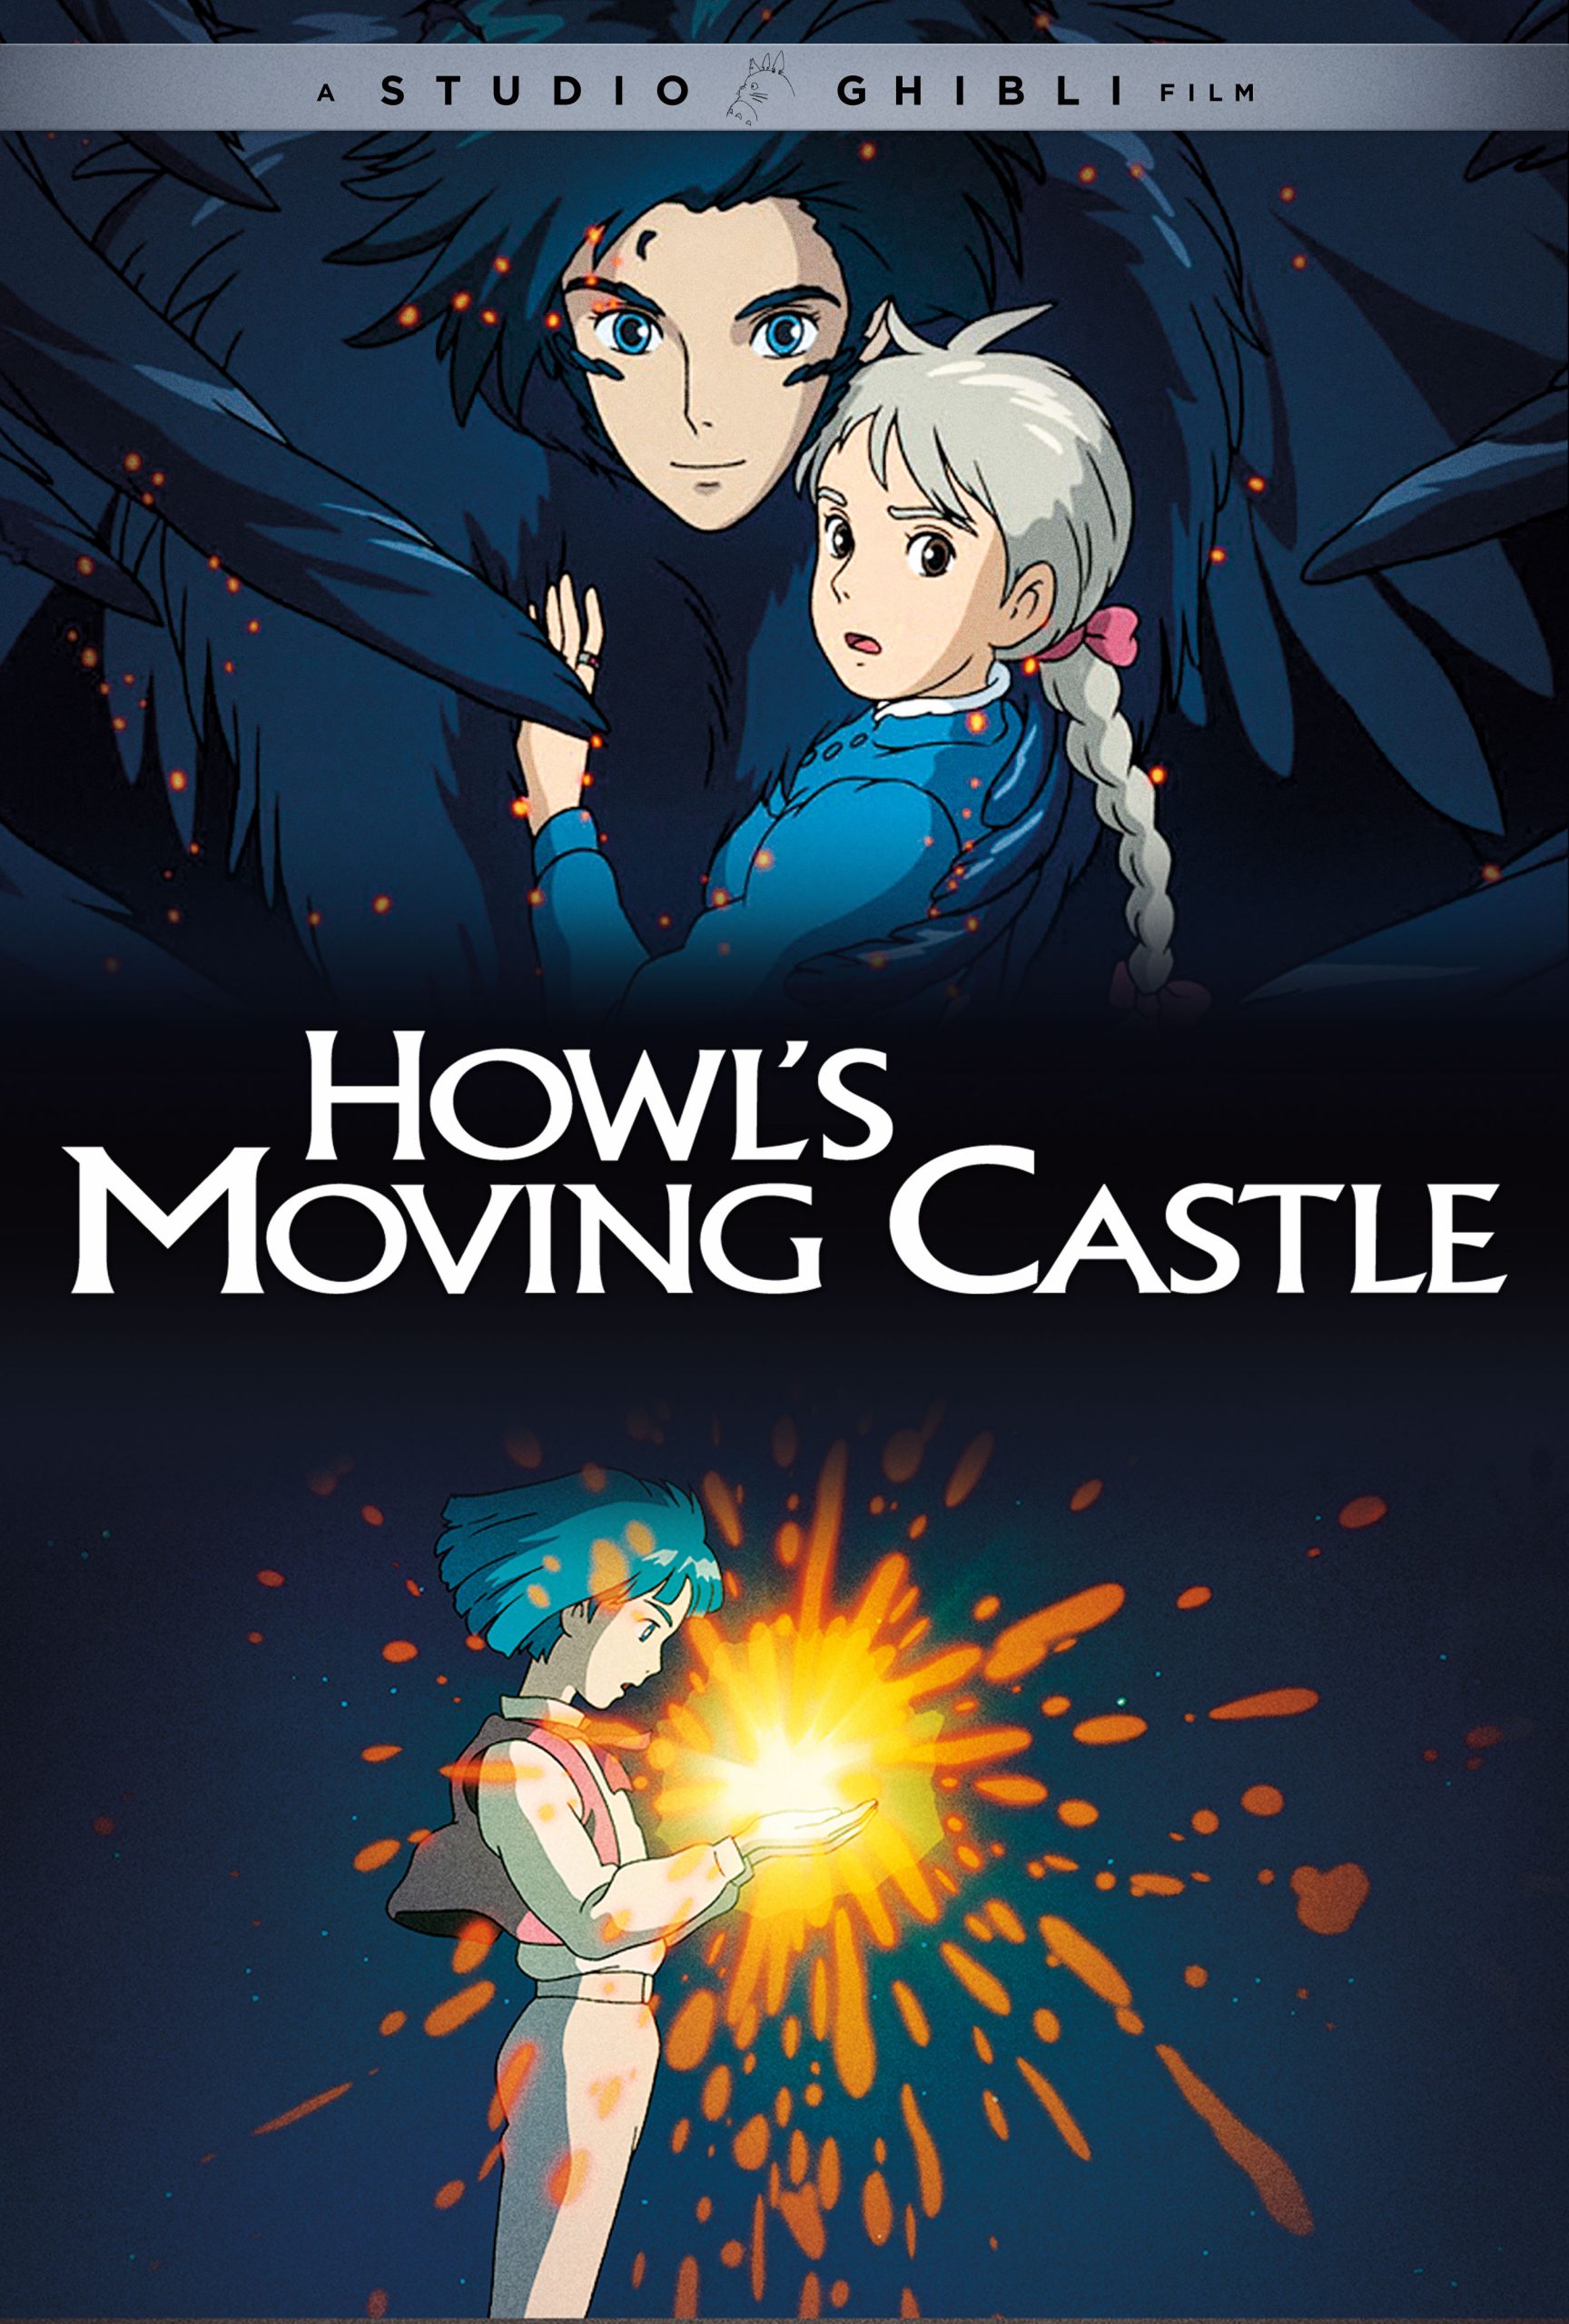 Howl’s Moving Castle 2004 Hindi Dual Audio 400MB BluRay 480p ESub Download